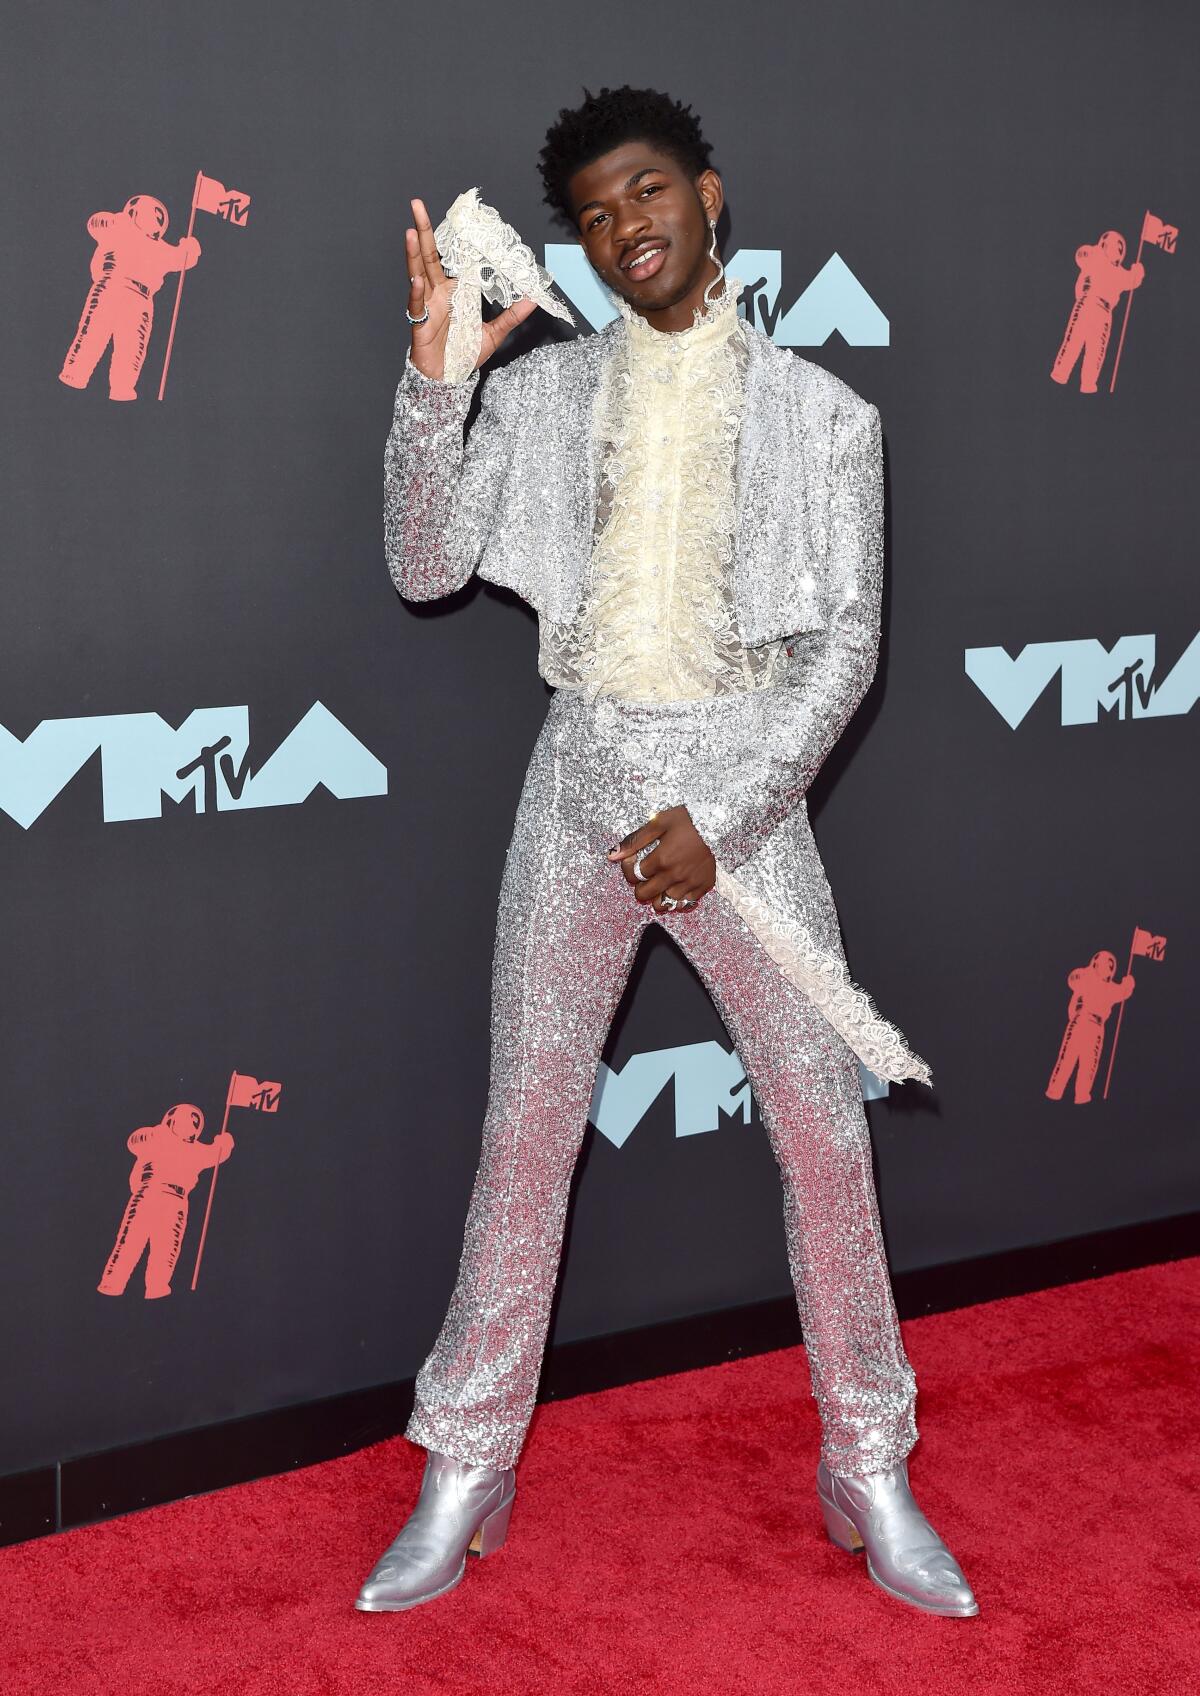 Lil Nas X in a custom Christian Cowan outfit on the red carpet at the 2019 MTV VMAs.